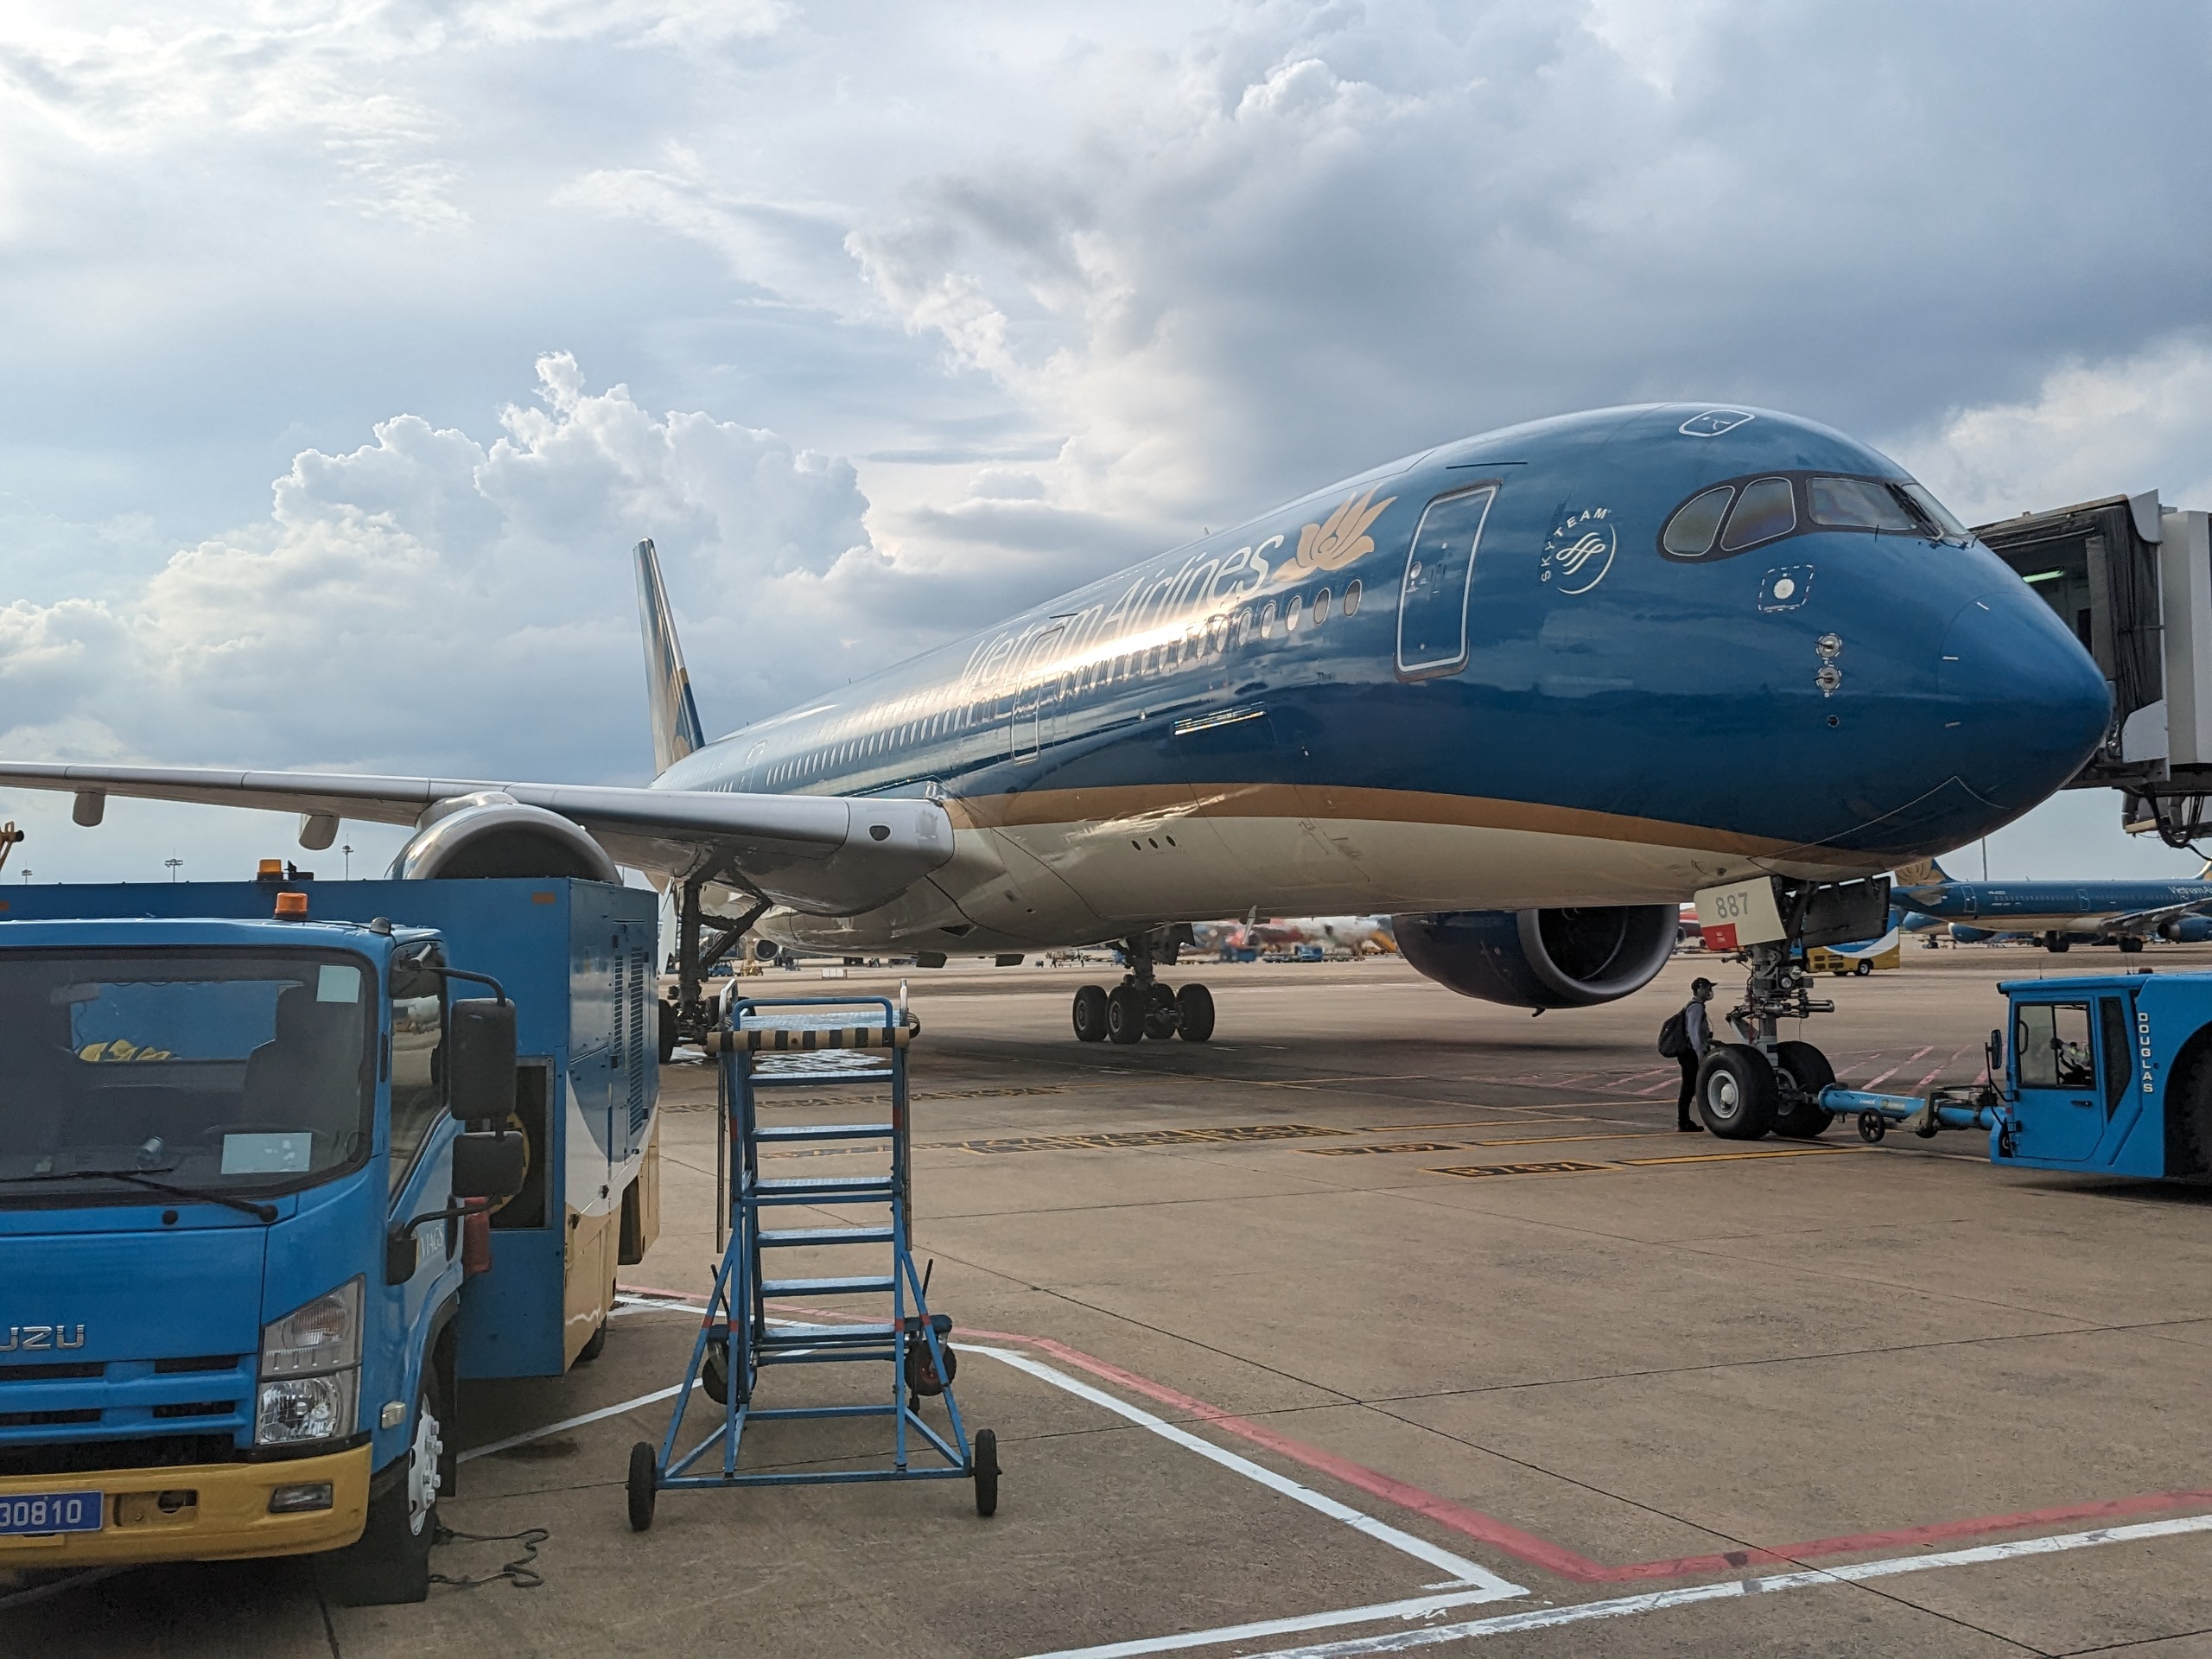 Vietnam Airlines Excellence in Air Travel